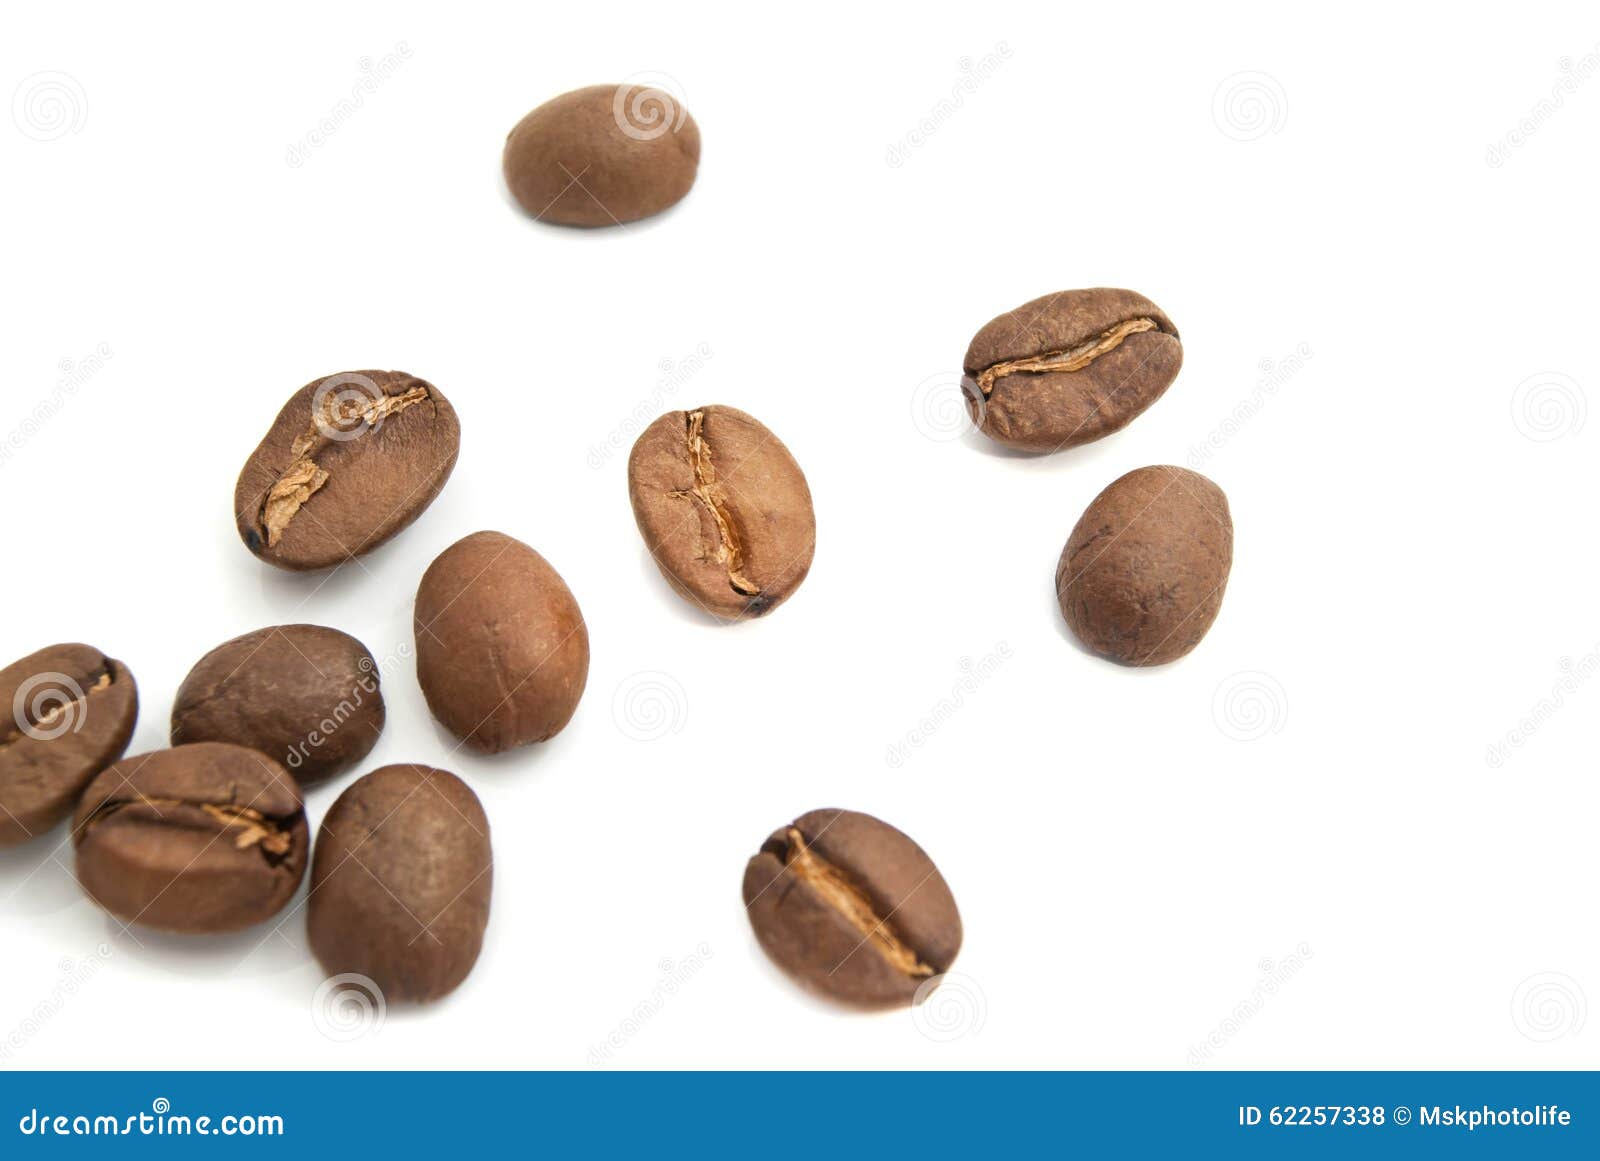 Roasted coffee beans stock photo. Image of aroma, seed - 62257338